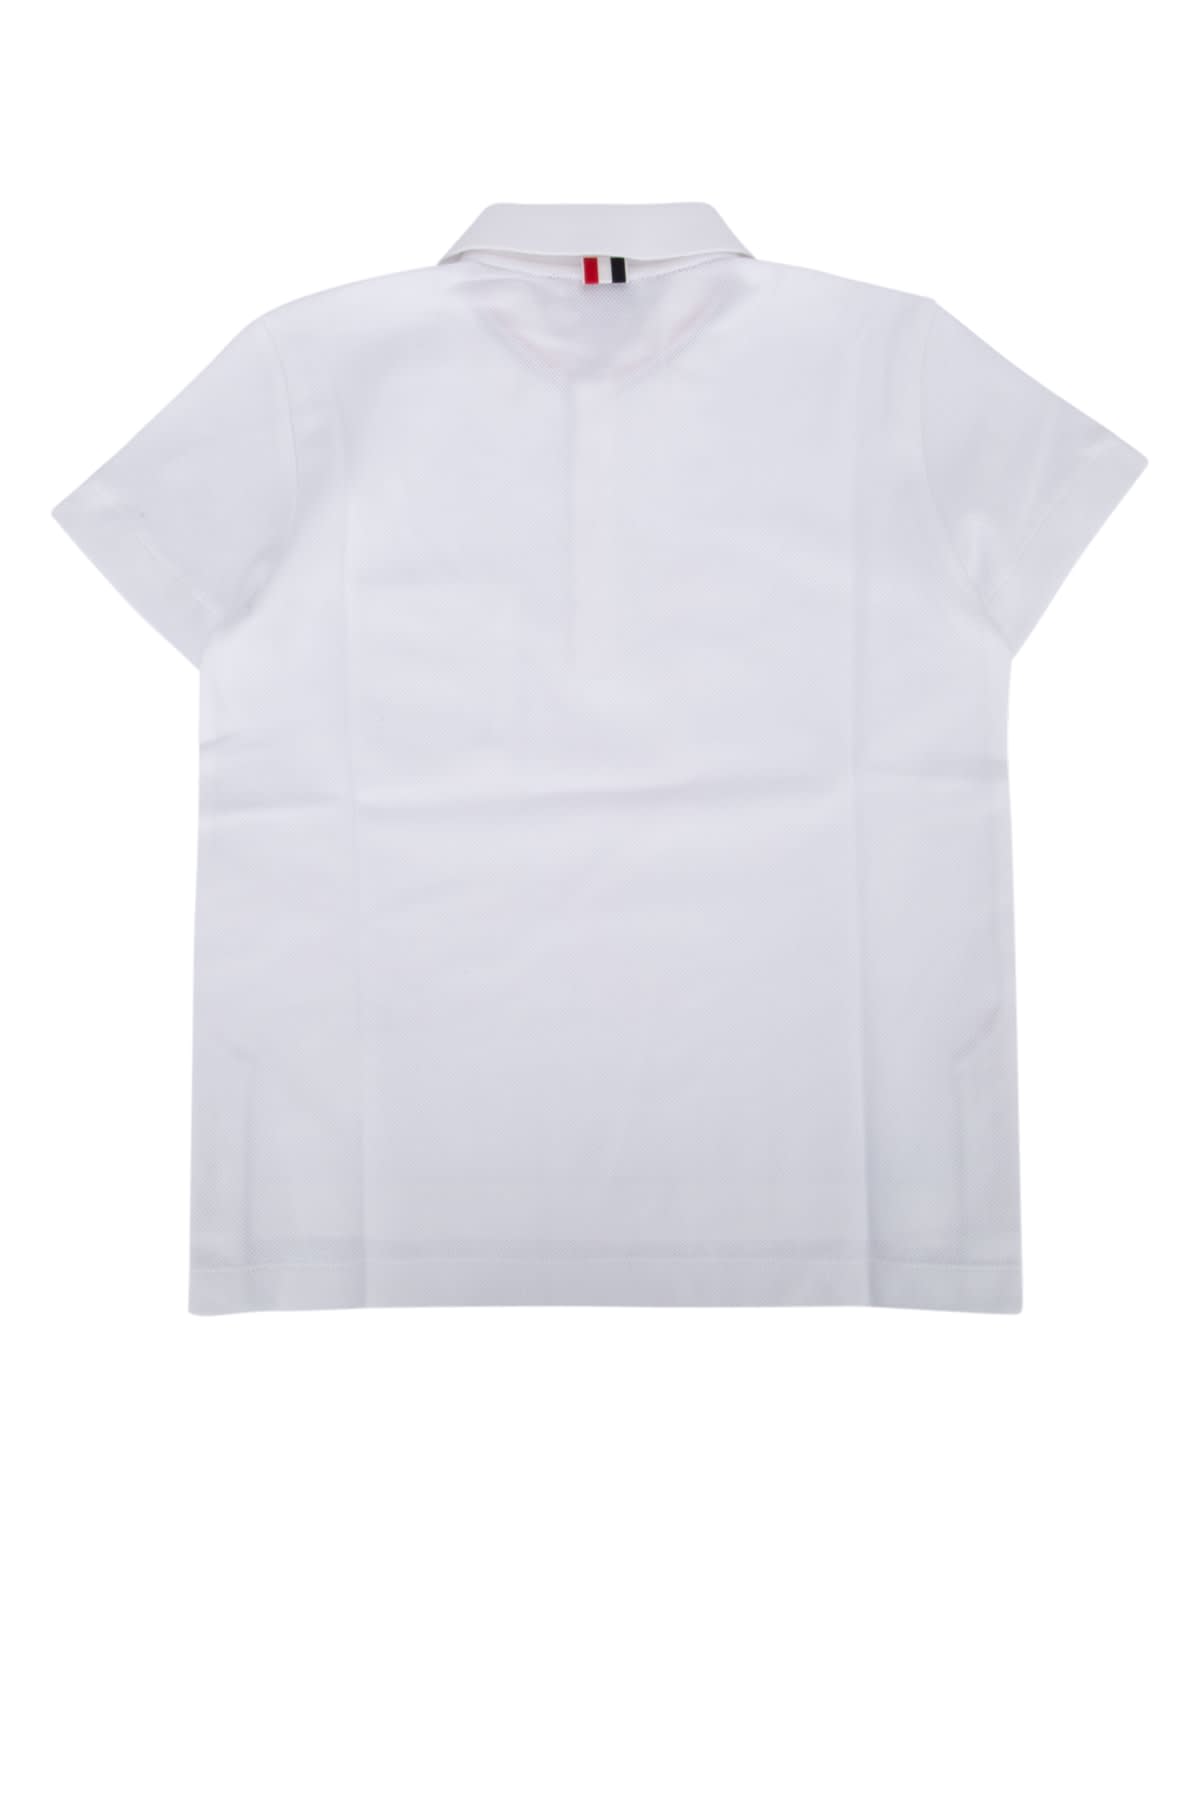 Thom Browne Kids' Polo In White